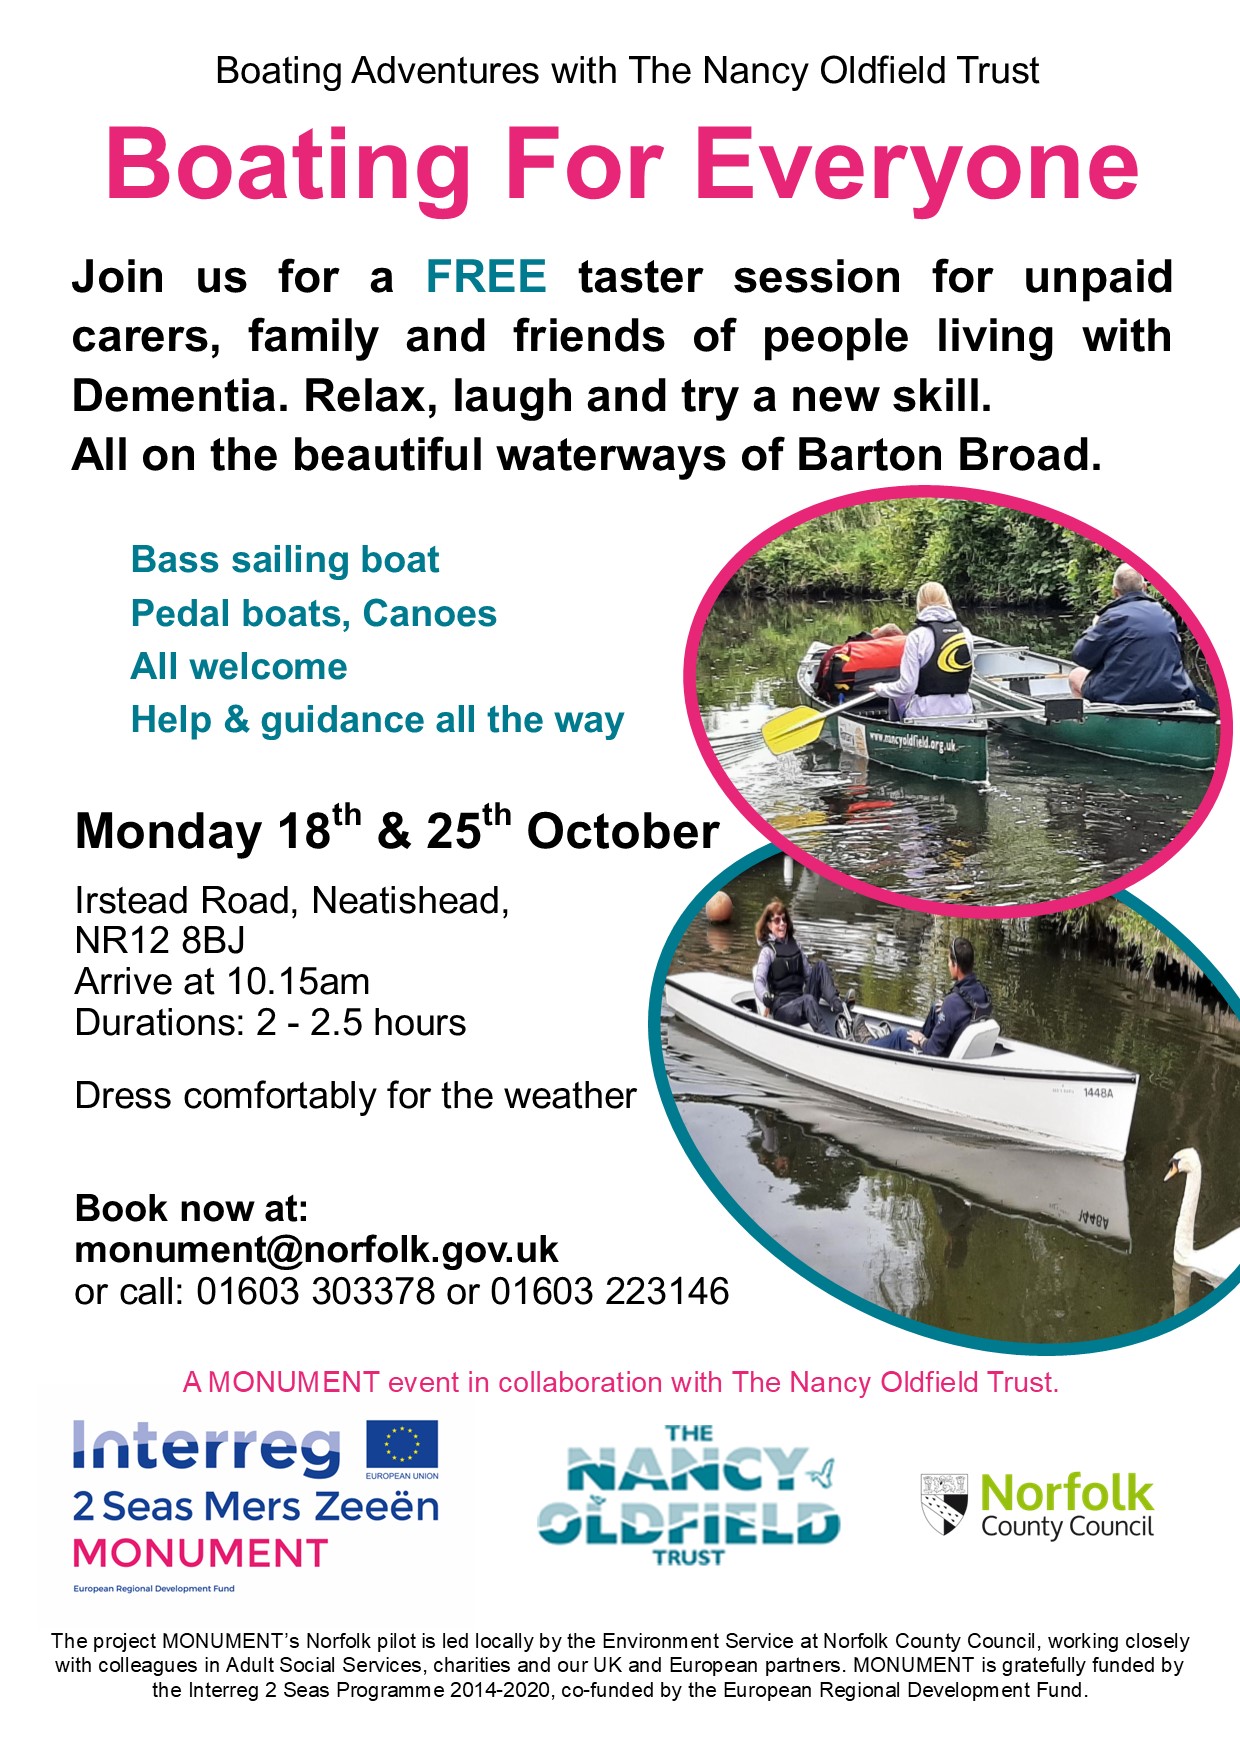 Boating for everyone with MONUMENT and Nancy Oldfield